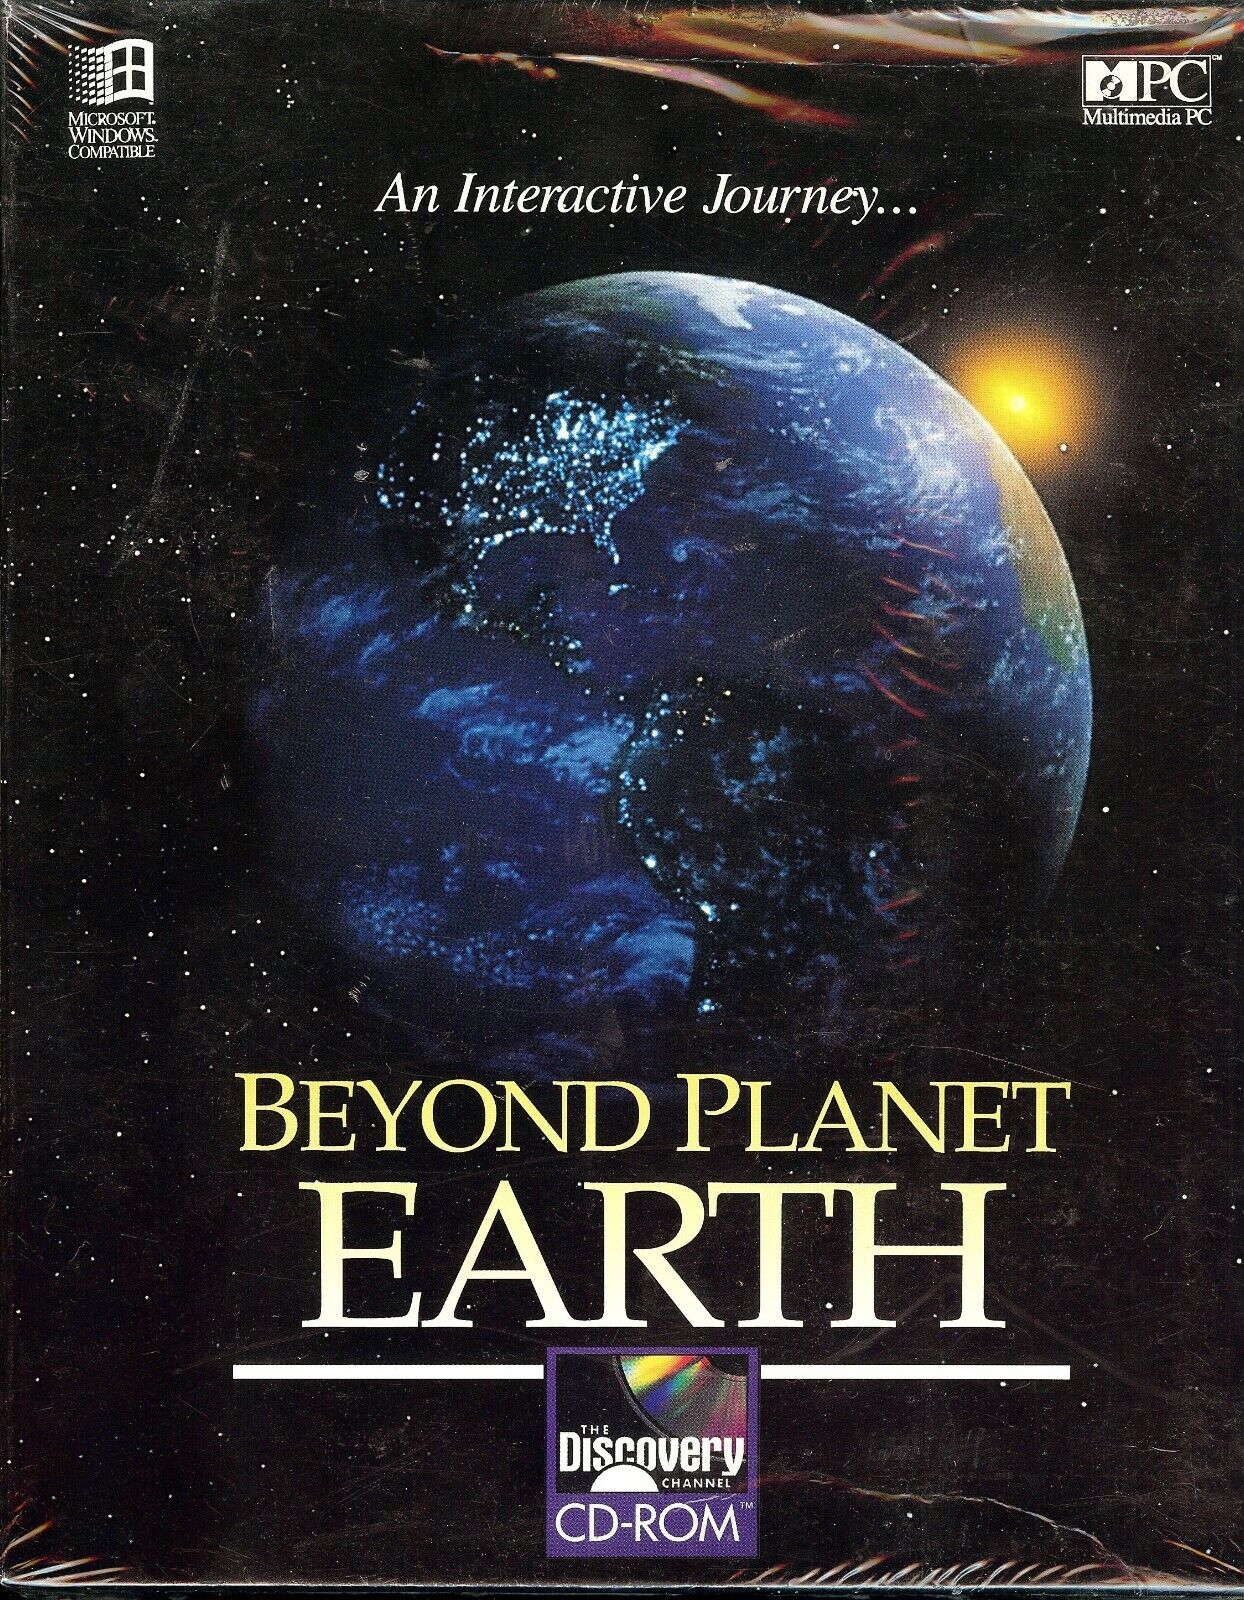 Beyond Planet Earth by Discovery Channel Multimedia CD-ROM 1994 (Unopened Box) 